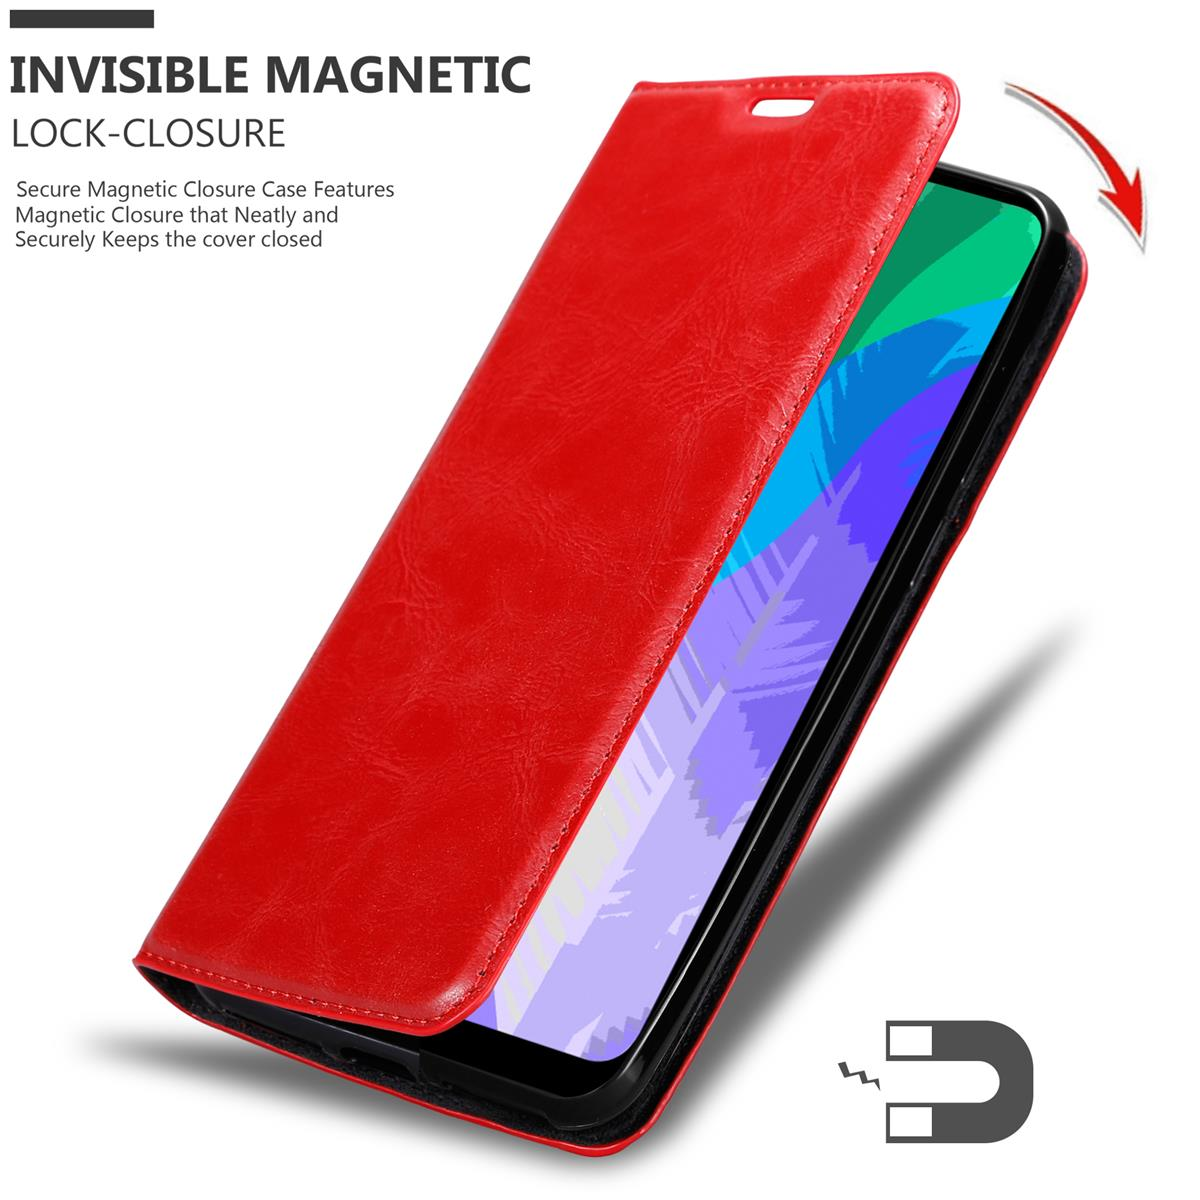 Magnet, Invisible Book Y6P, Huawei, CADORABO Bookcover, Hülle APFEL ROT